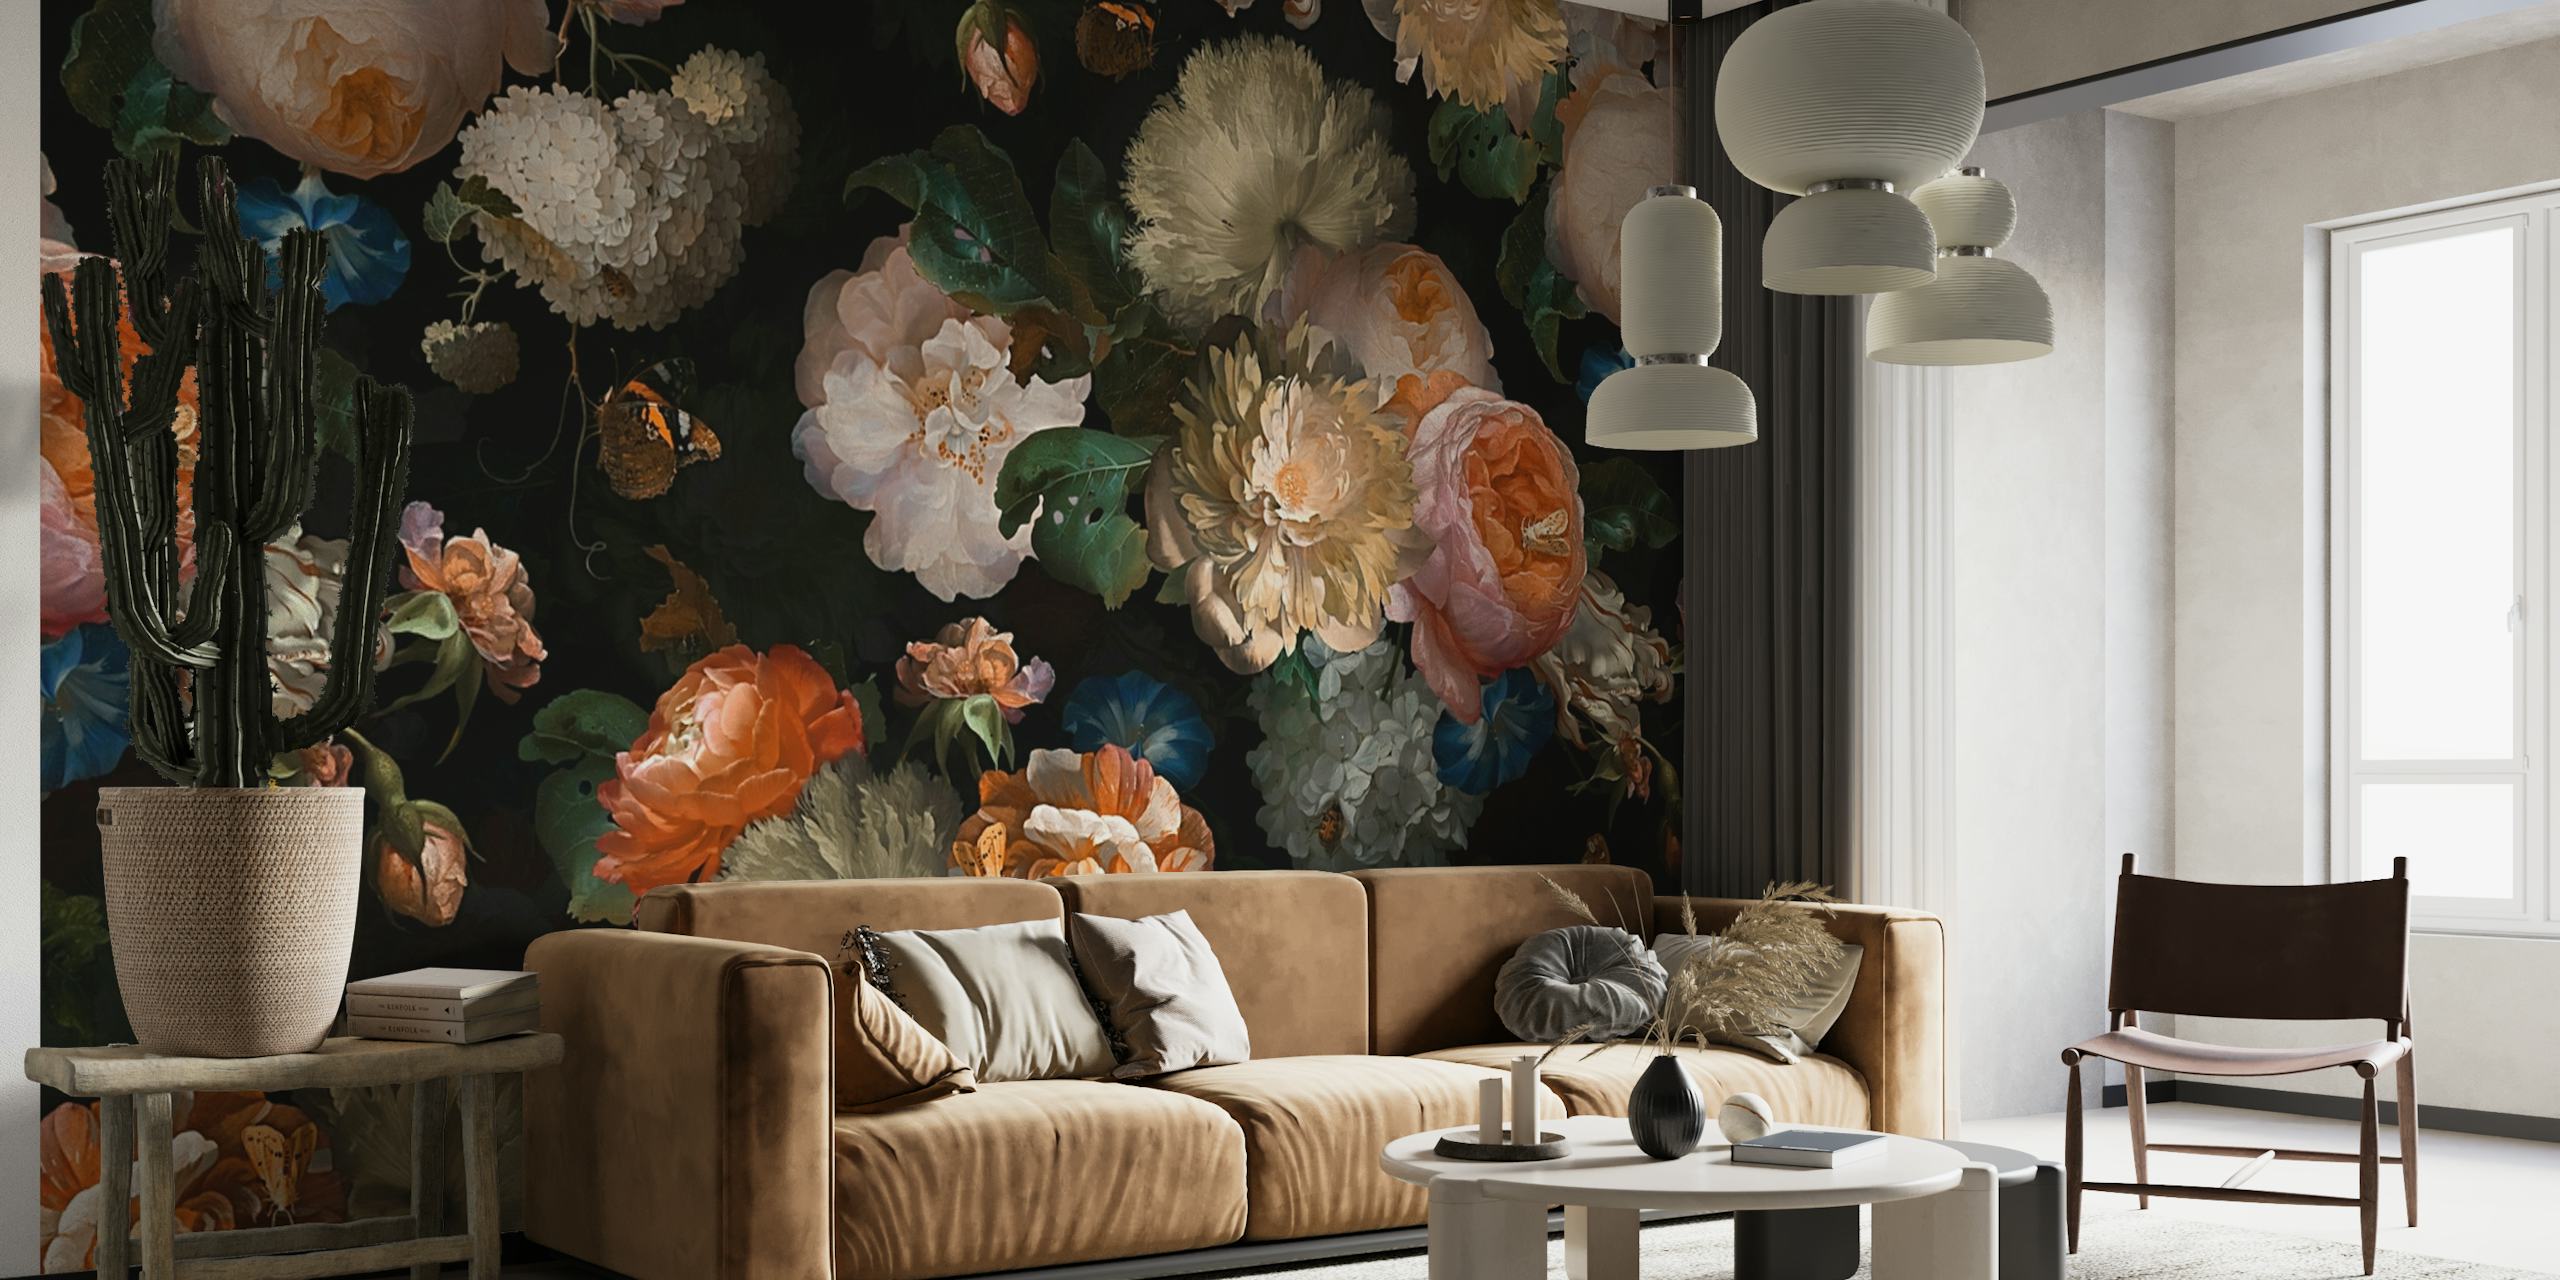 Opulent Baroque-style floral wall mural with dark background and vintage hues.